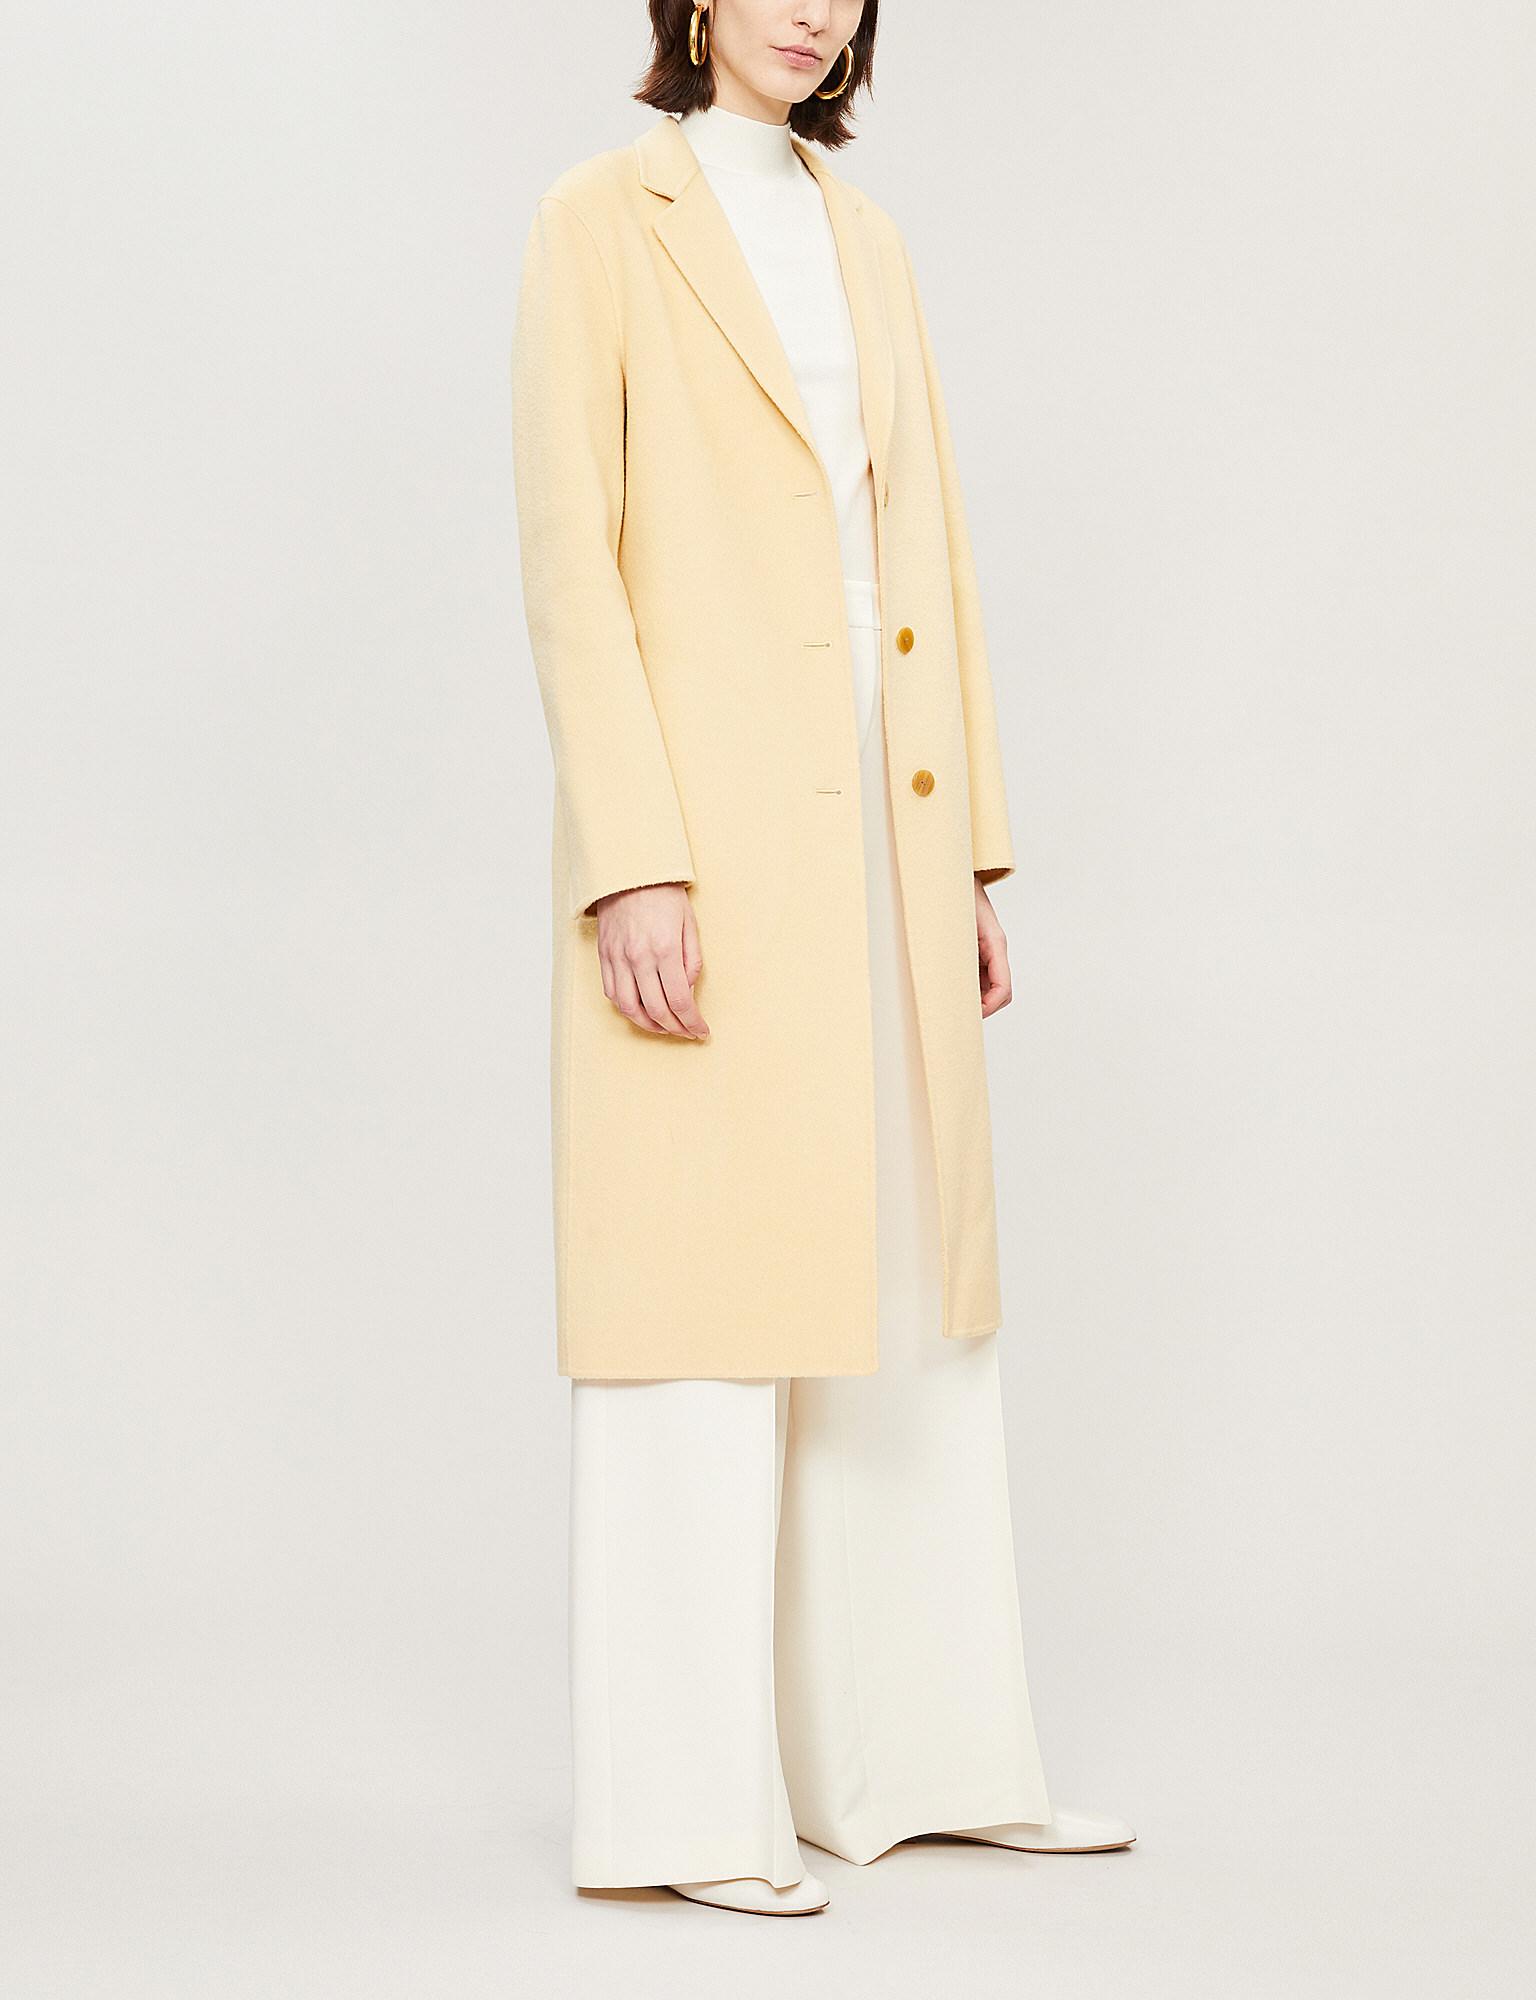 Lyst - Theory Boy Notch-lapel Wool And Cashmere-blend Coat in Natural